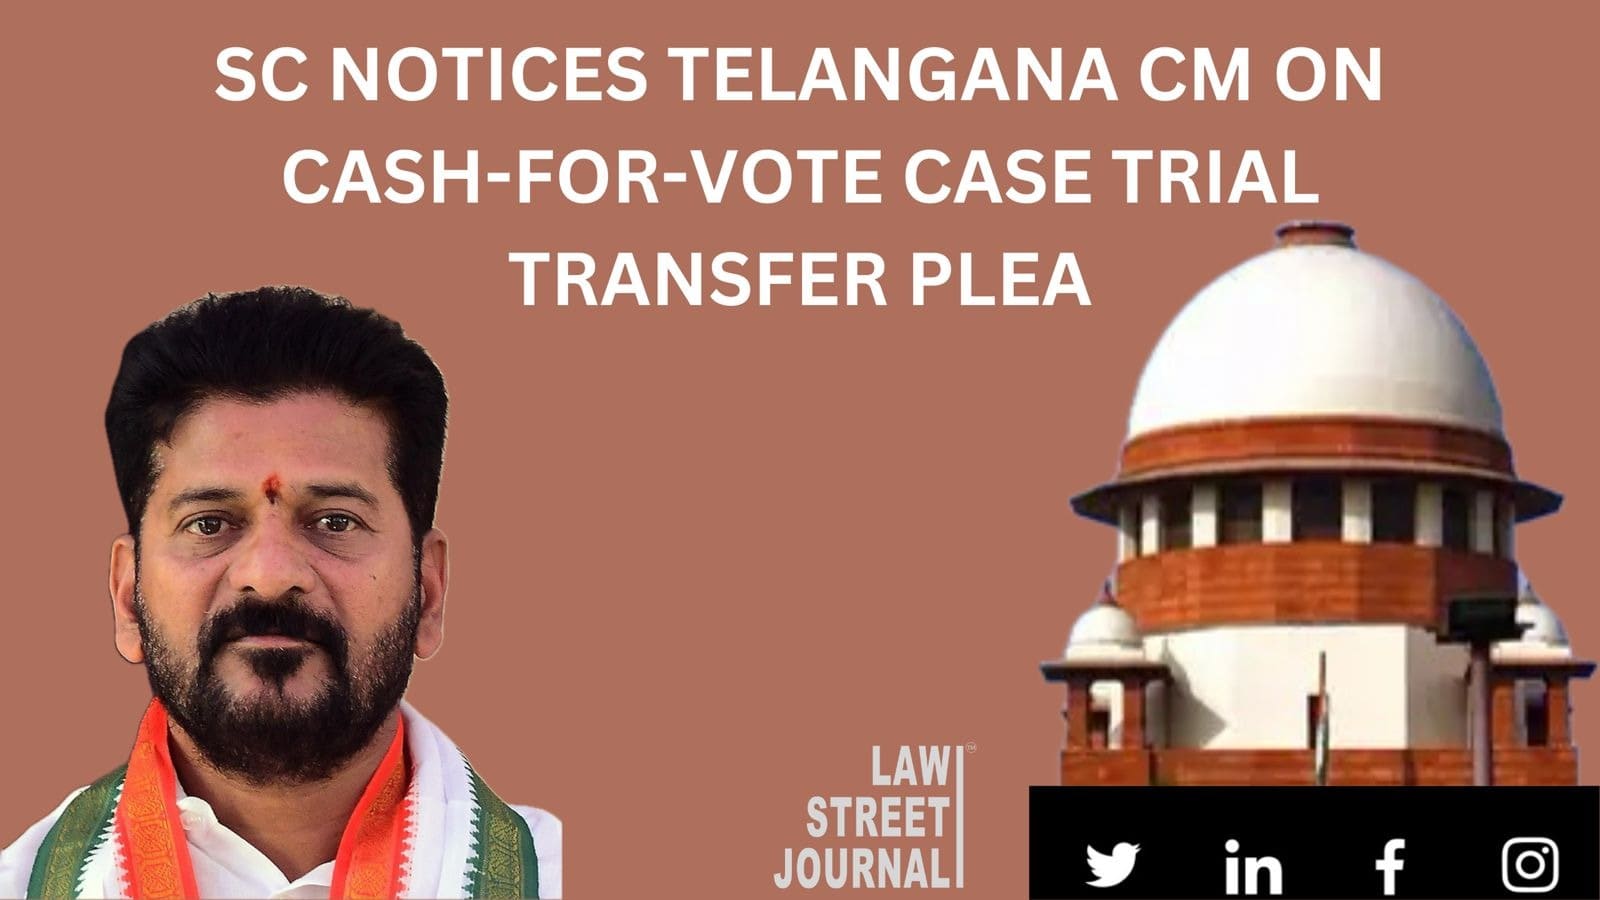 Cash-for-vote case: SC issues notice to CM on plea to transfer trial against him 